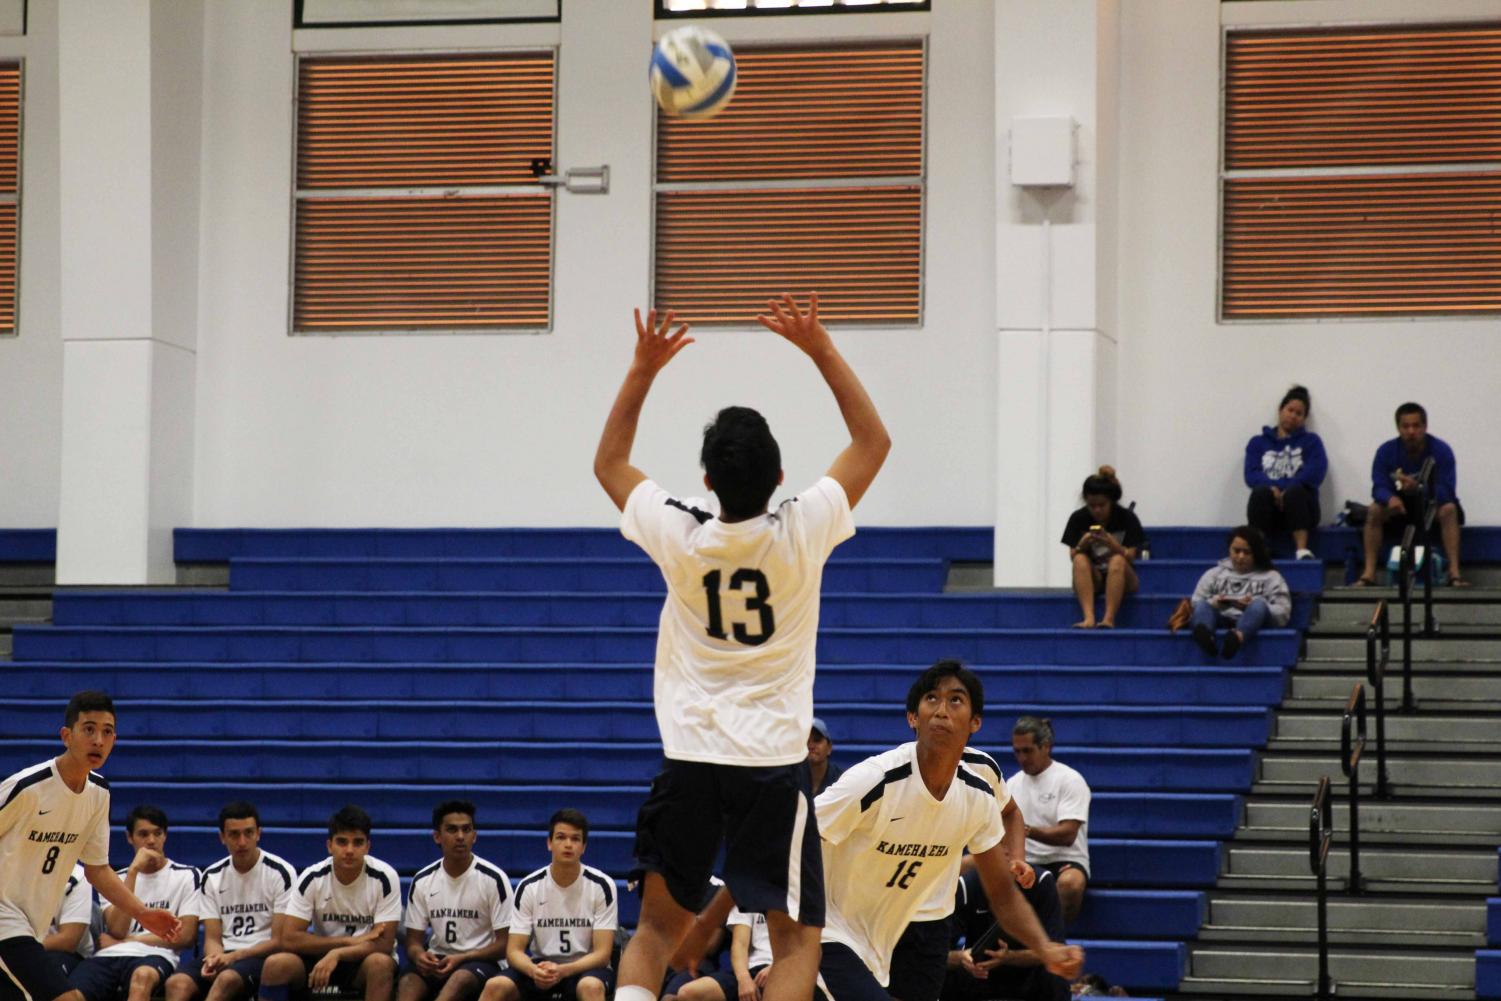 Boys Volleyball: Peters, Adolpho lead undefeated MIL season